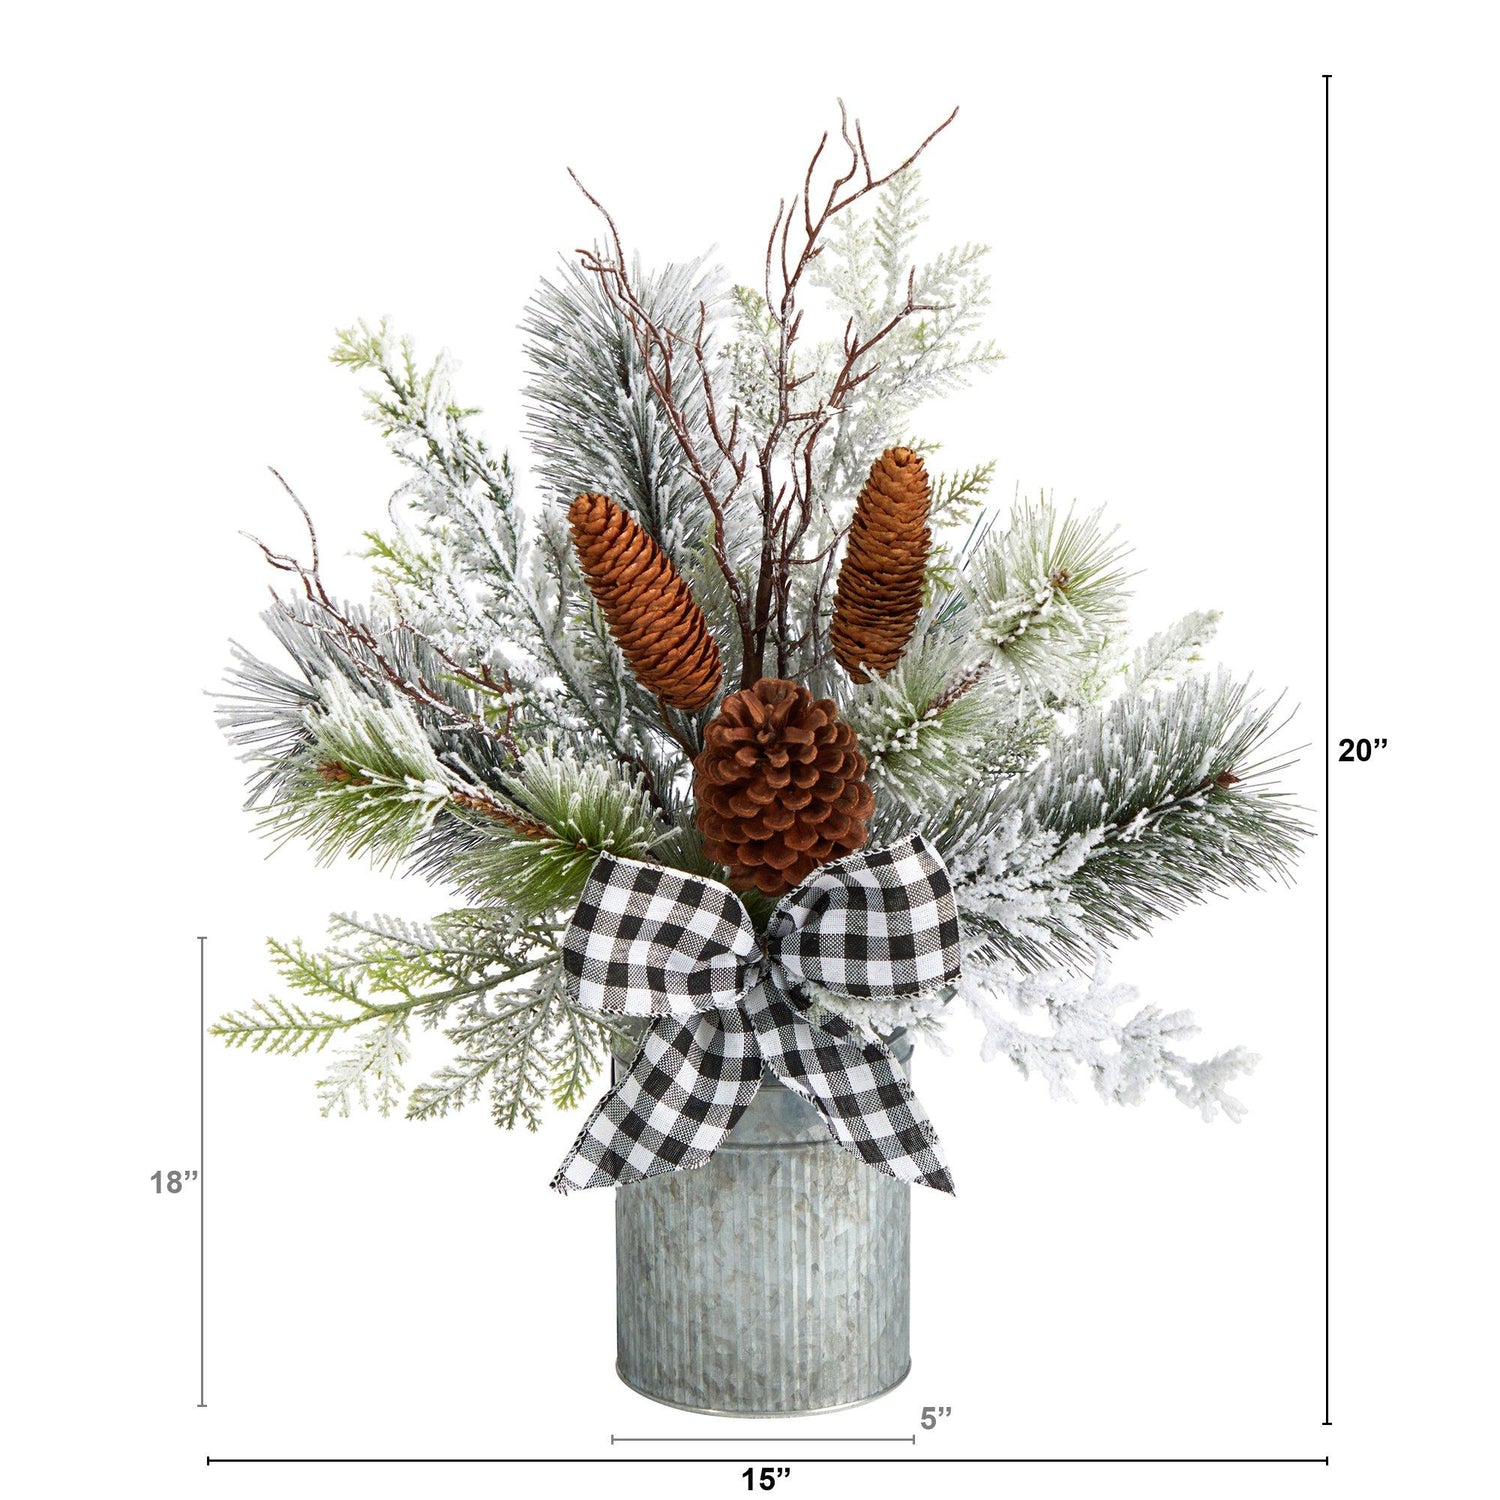 20” Holiday Winter Greenery with Pinecones and Gingham Plaid Bow Table Christmas Arrangement